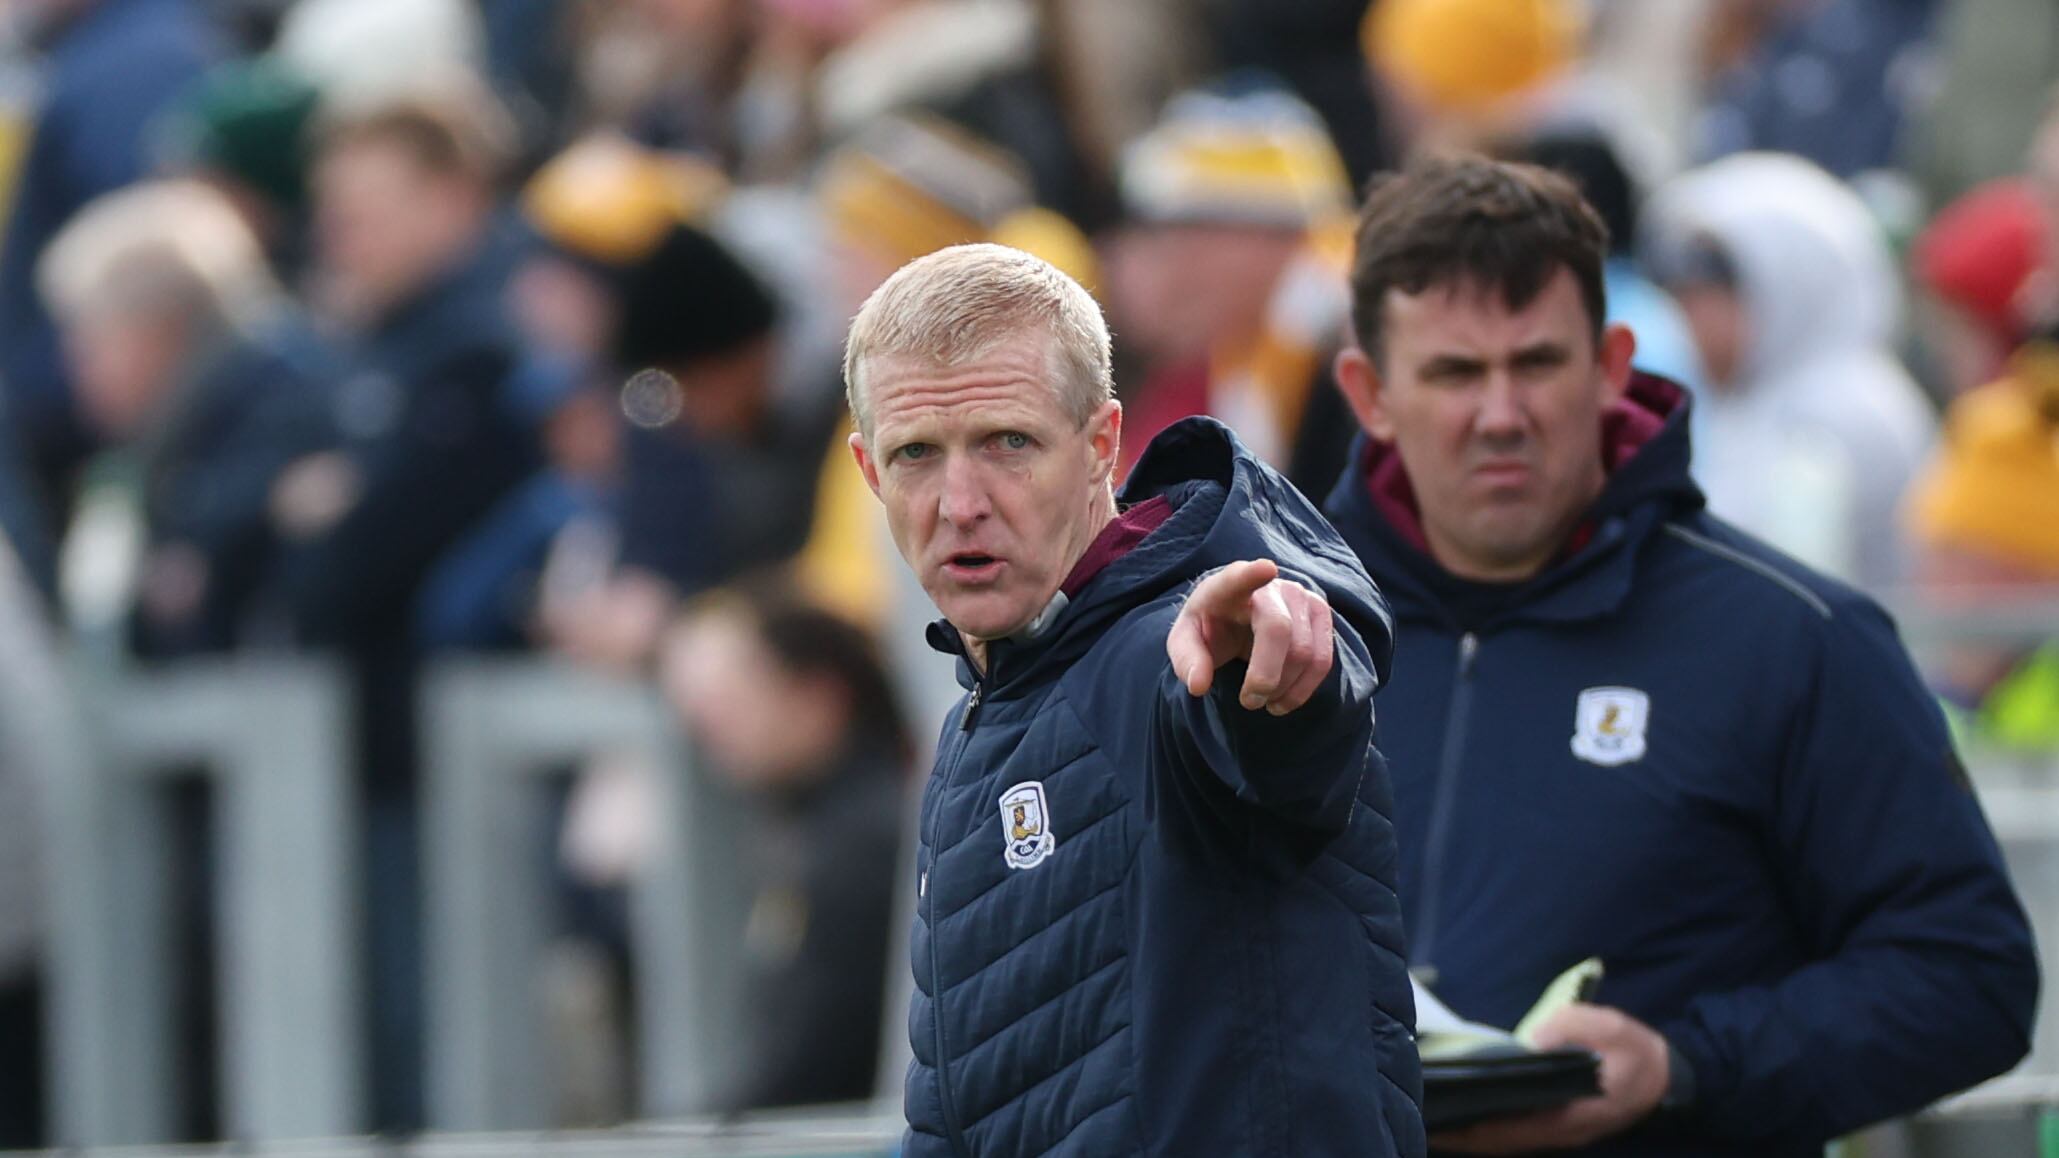 Galway manager Henry Shefflin during Sunday’s Allianz Hurling League Roinn 1 game at Corrigan Park in Belfast.
PICTURE: COLM LENAGHAN